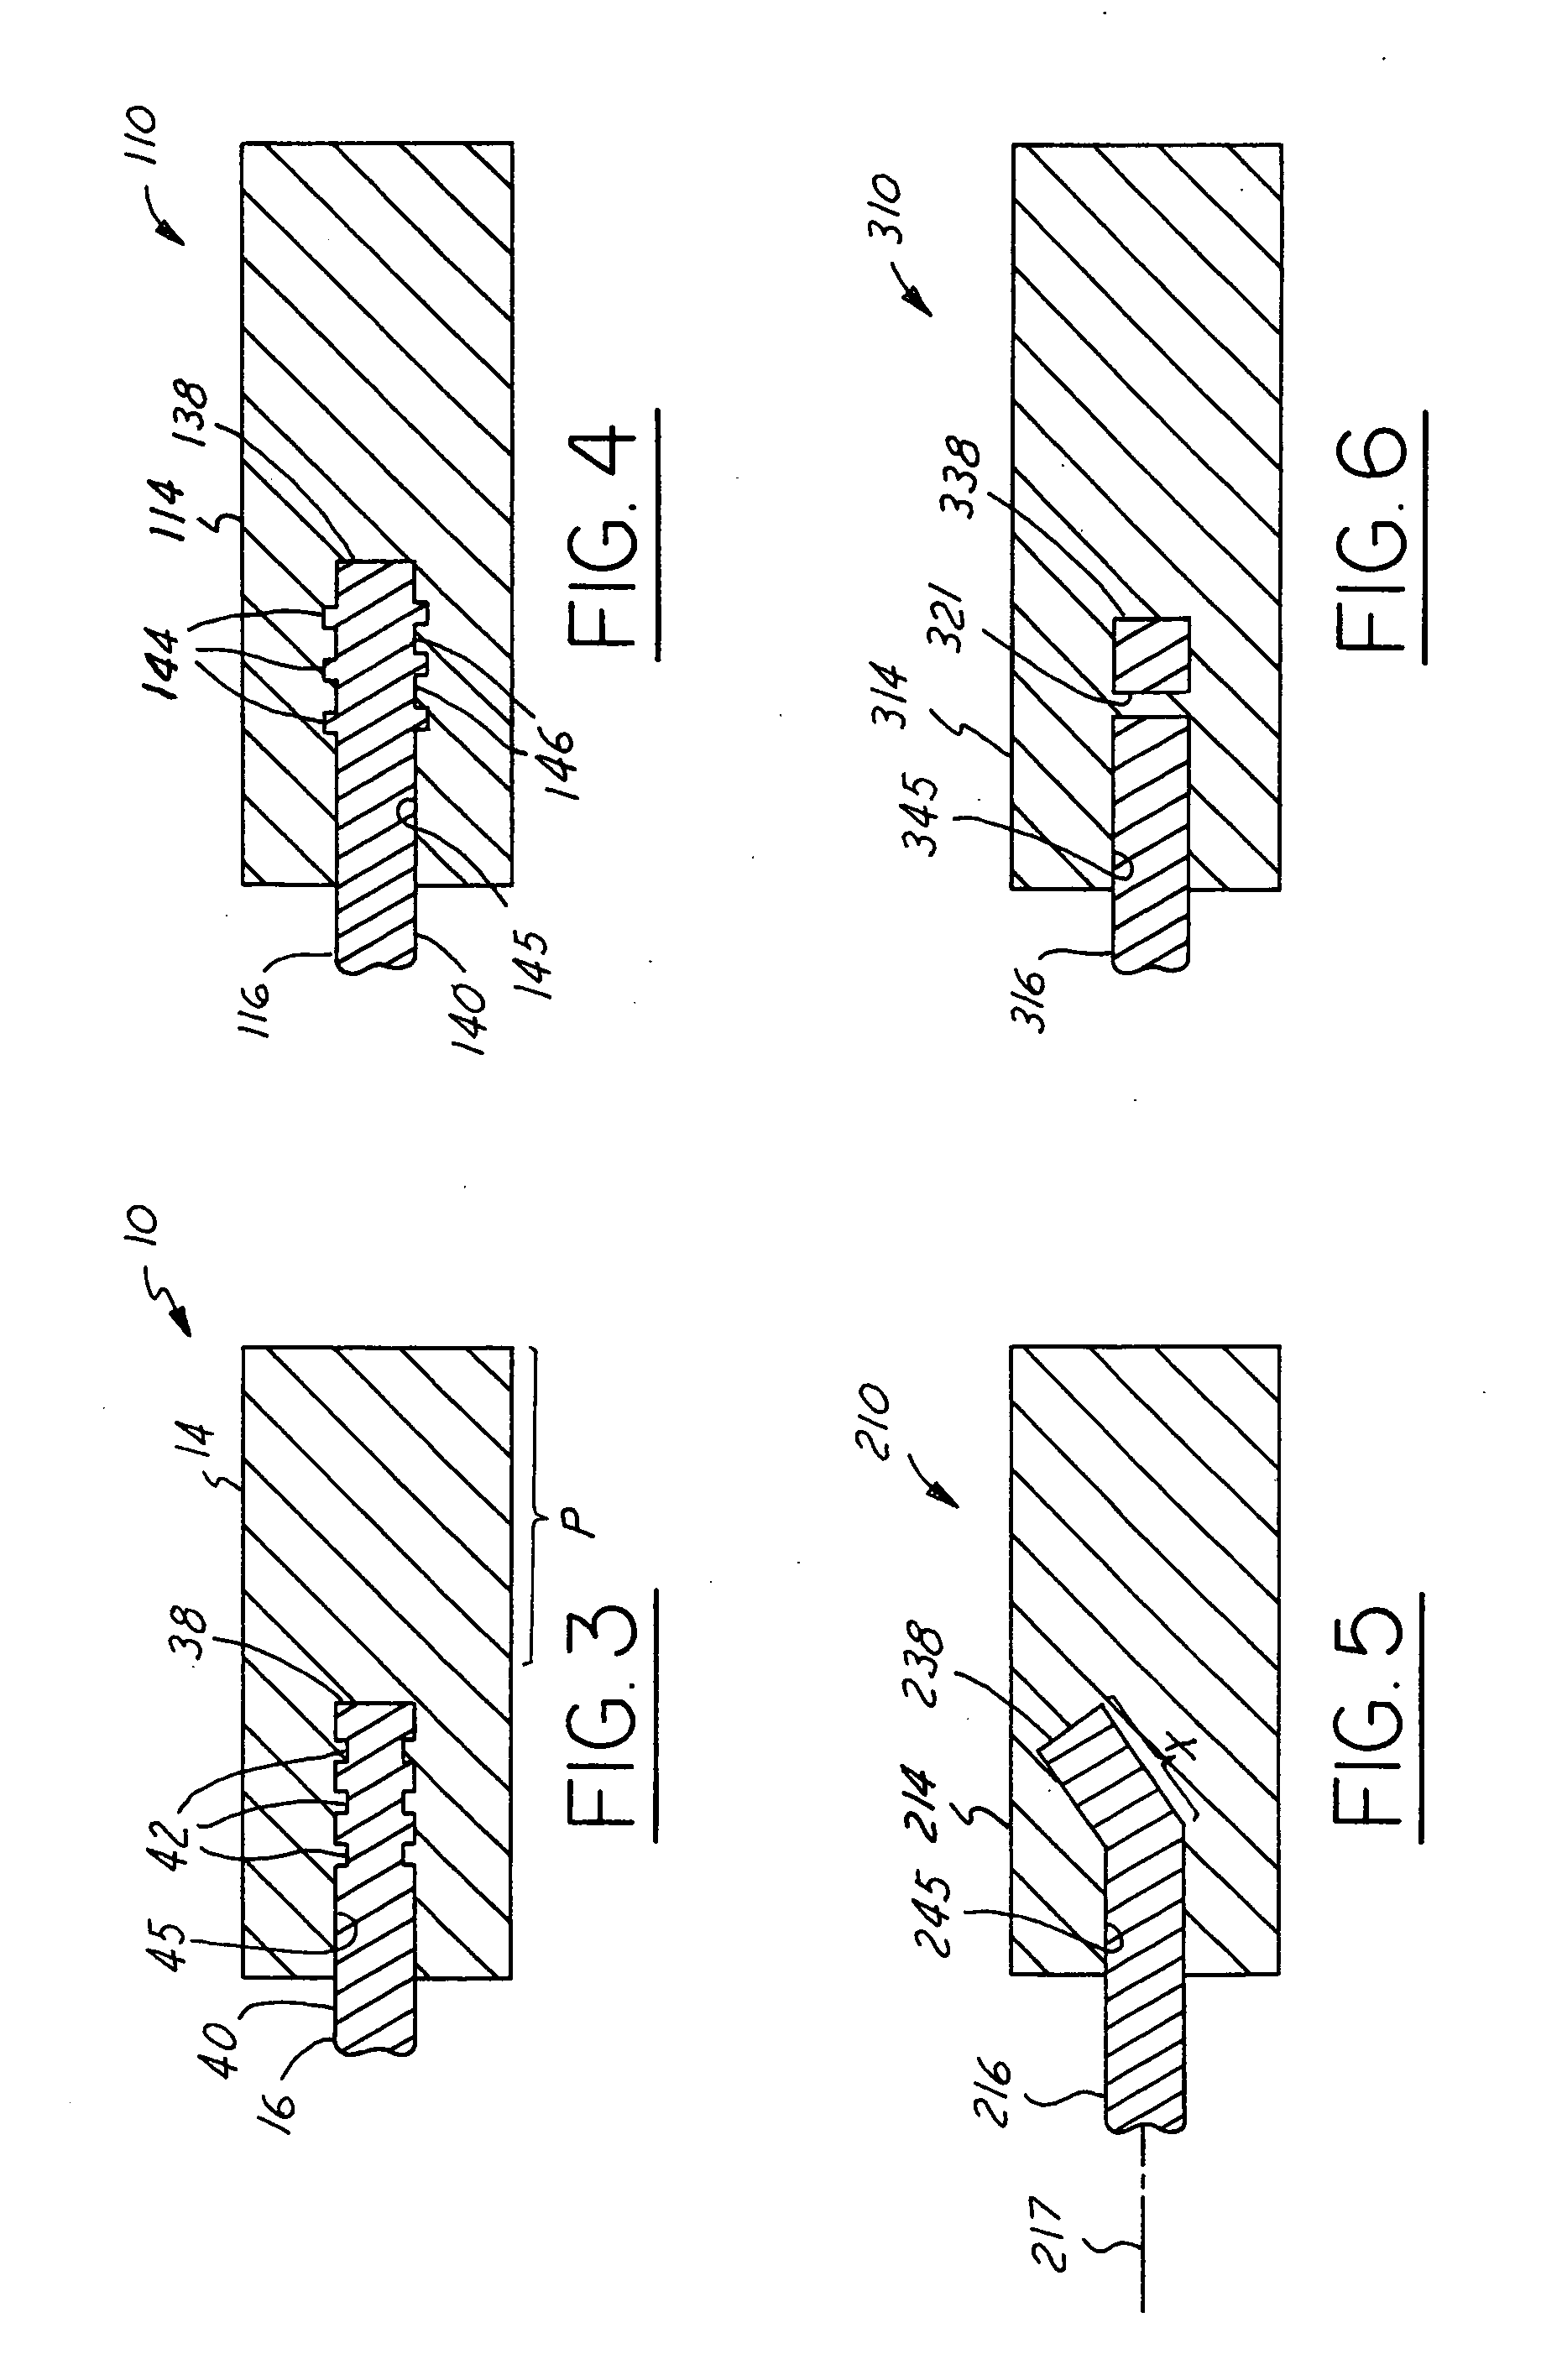 Float arm assembly and method of manufacture